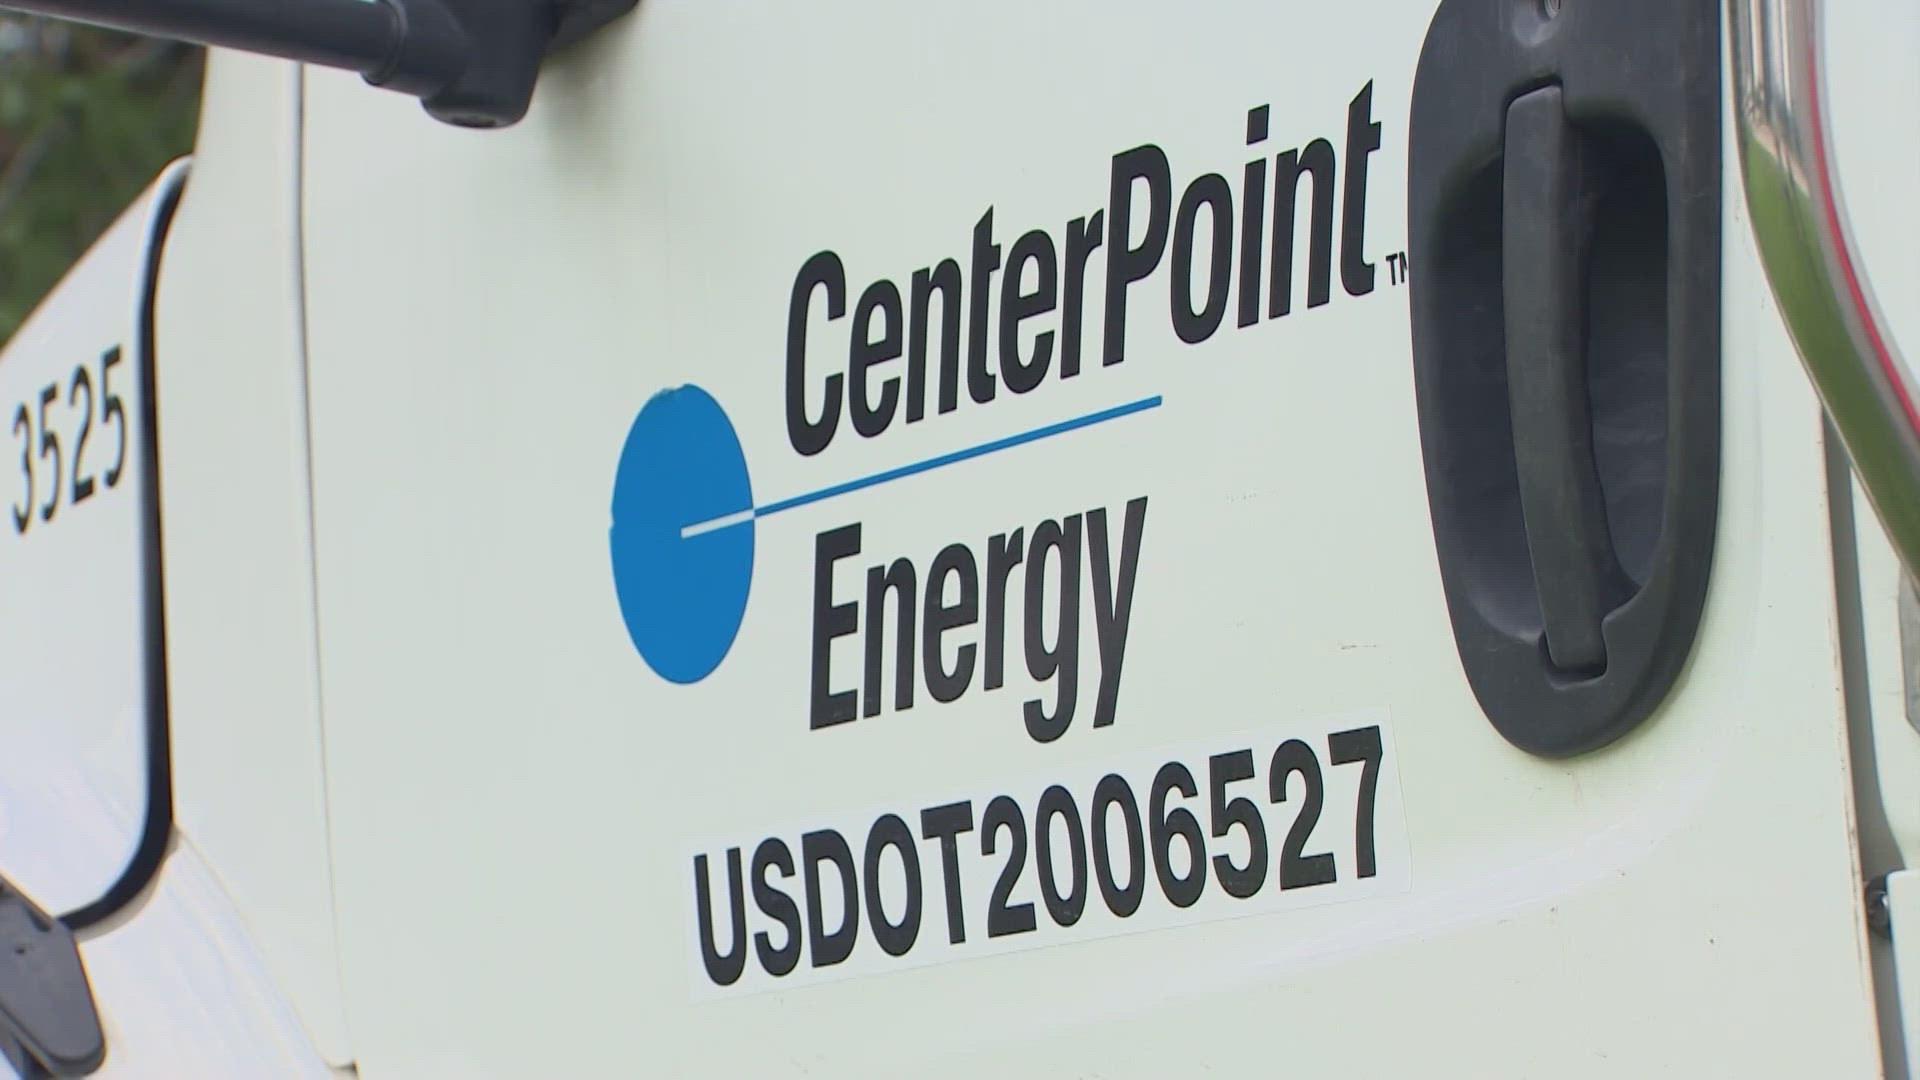 Lawmakers are expected to hear from CenterPoint Energy leadership in a special state committee hearing on Monday.